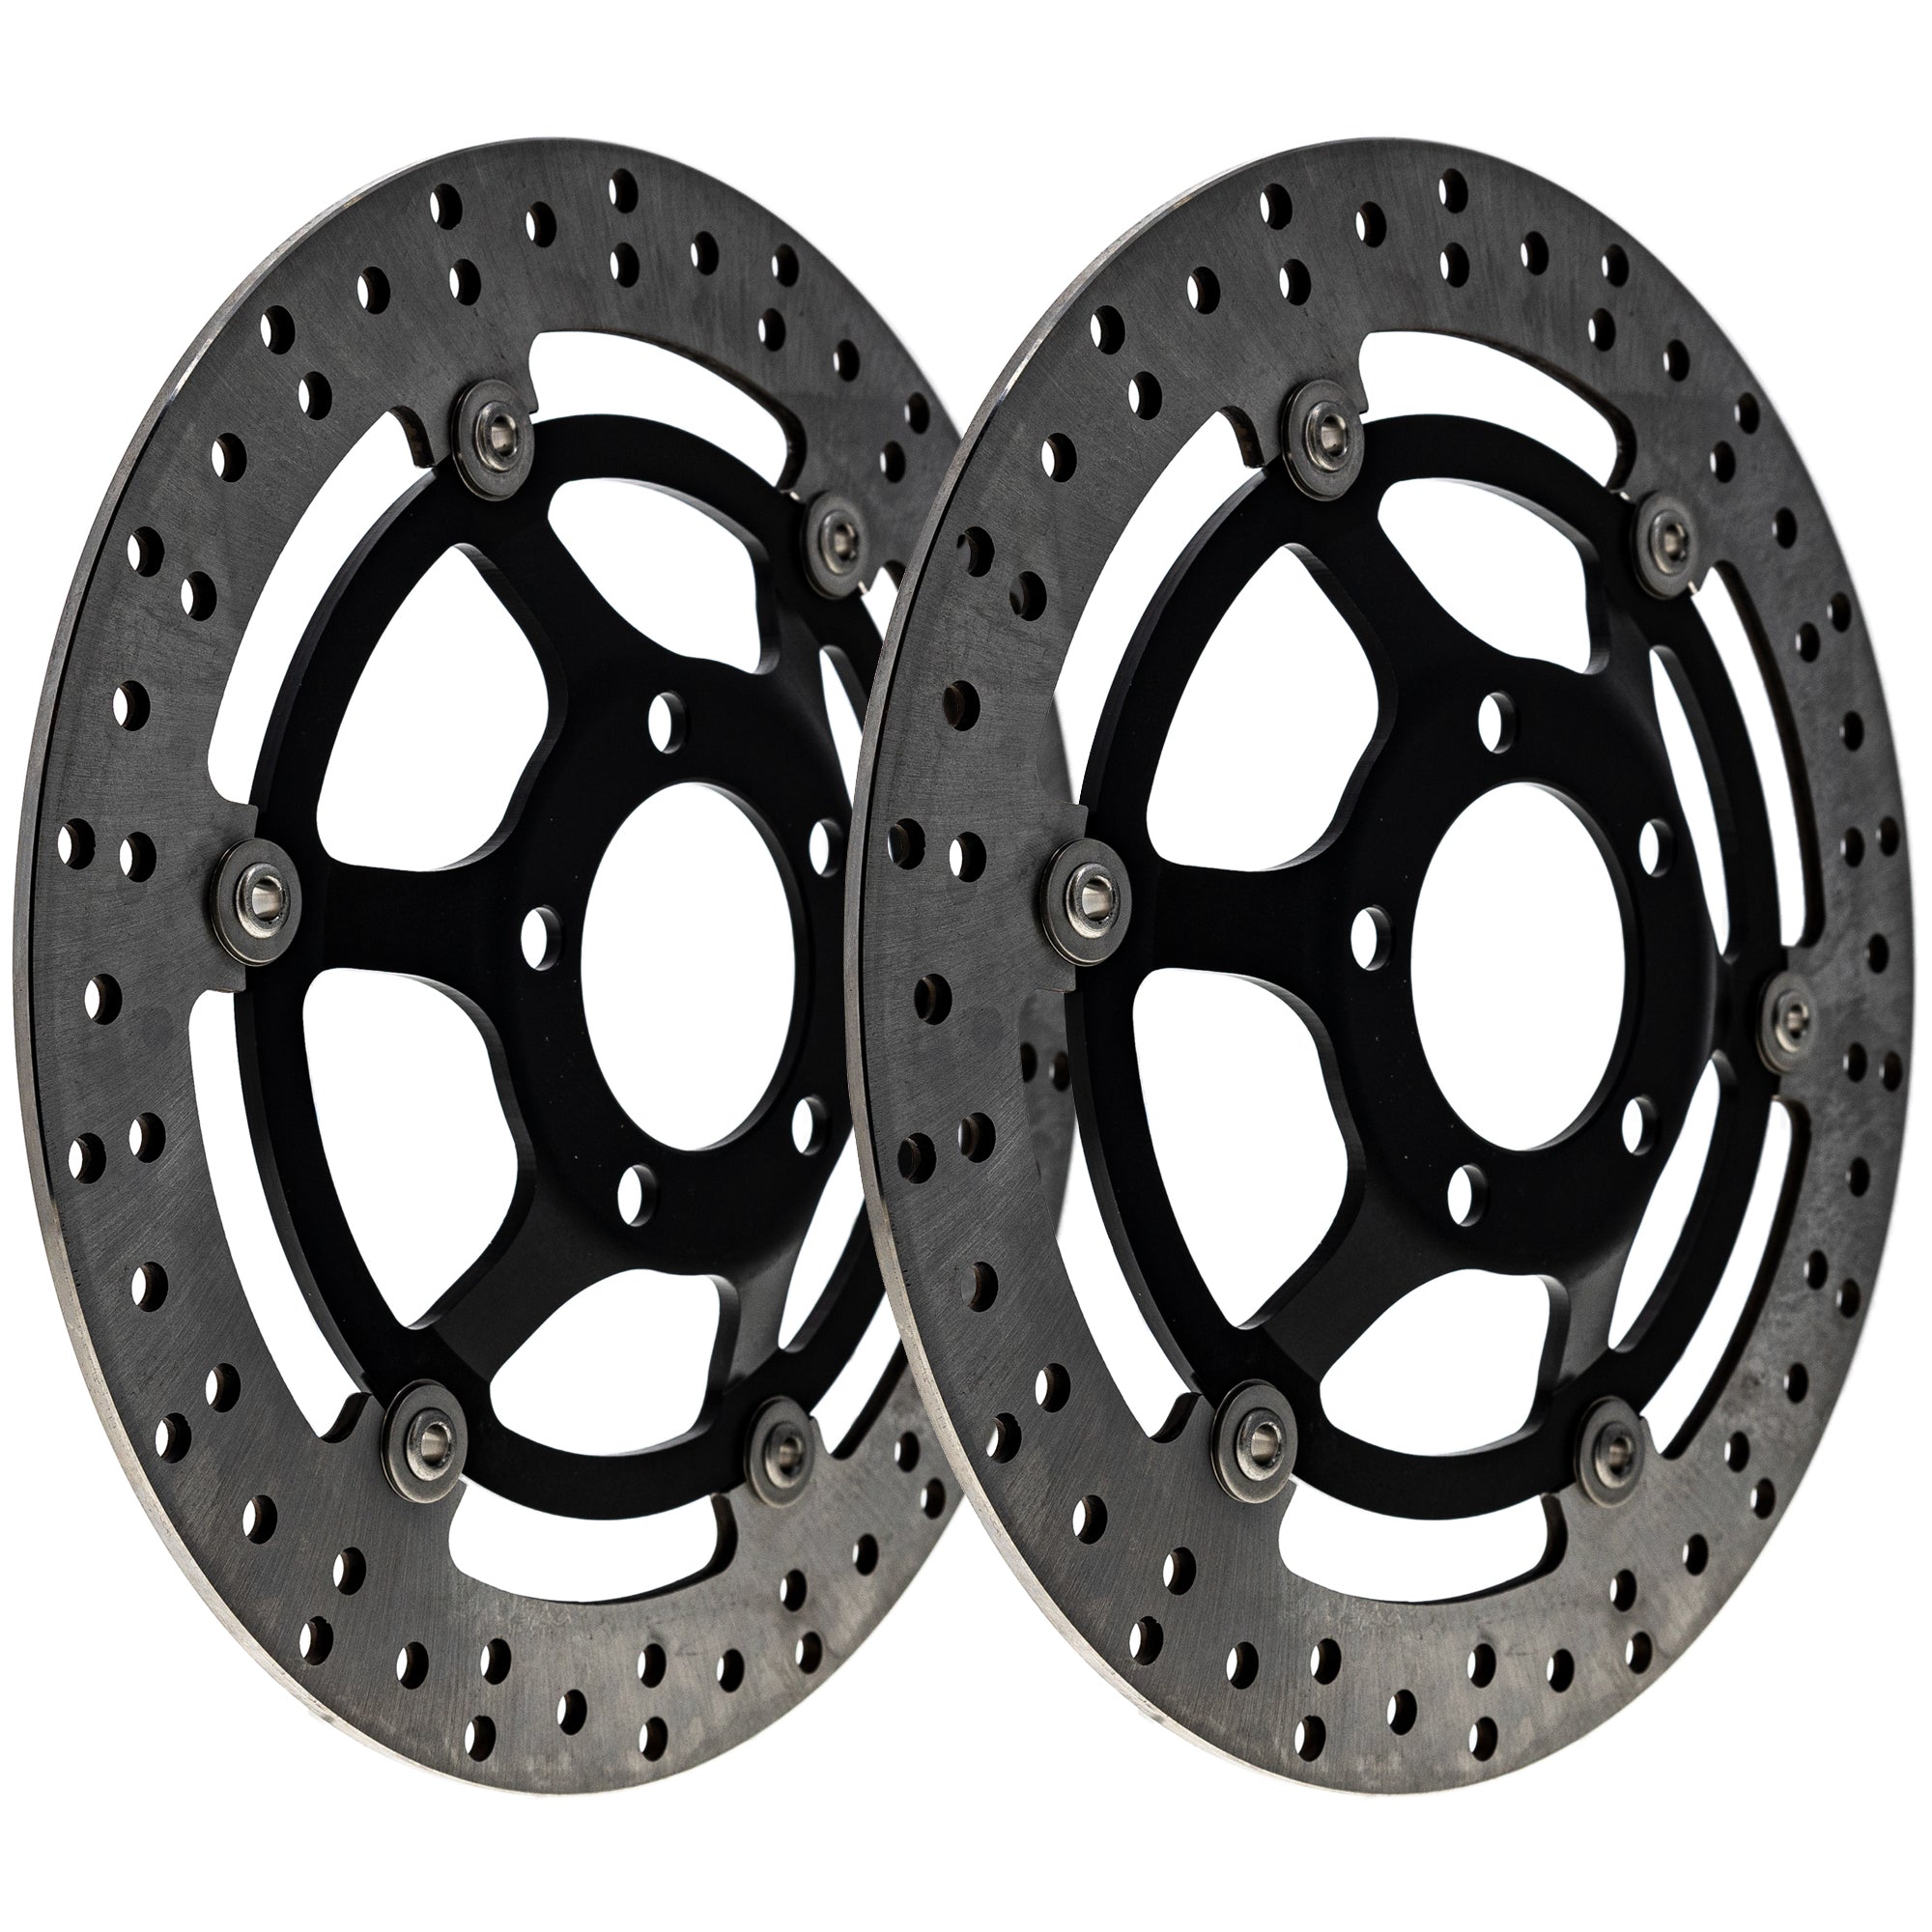 Front Brake Rotor 2-Pack for zOTHER SV650S SV650 RF600R Katana NICHE 519-CRT2219R